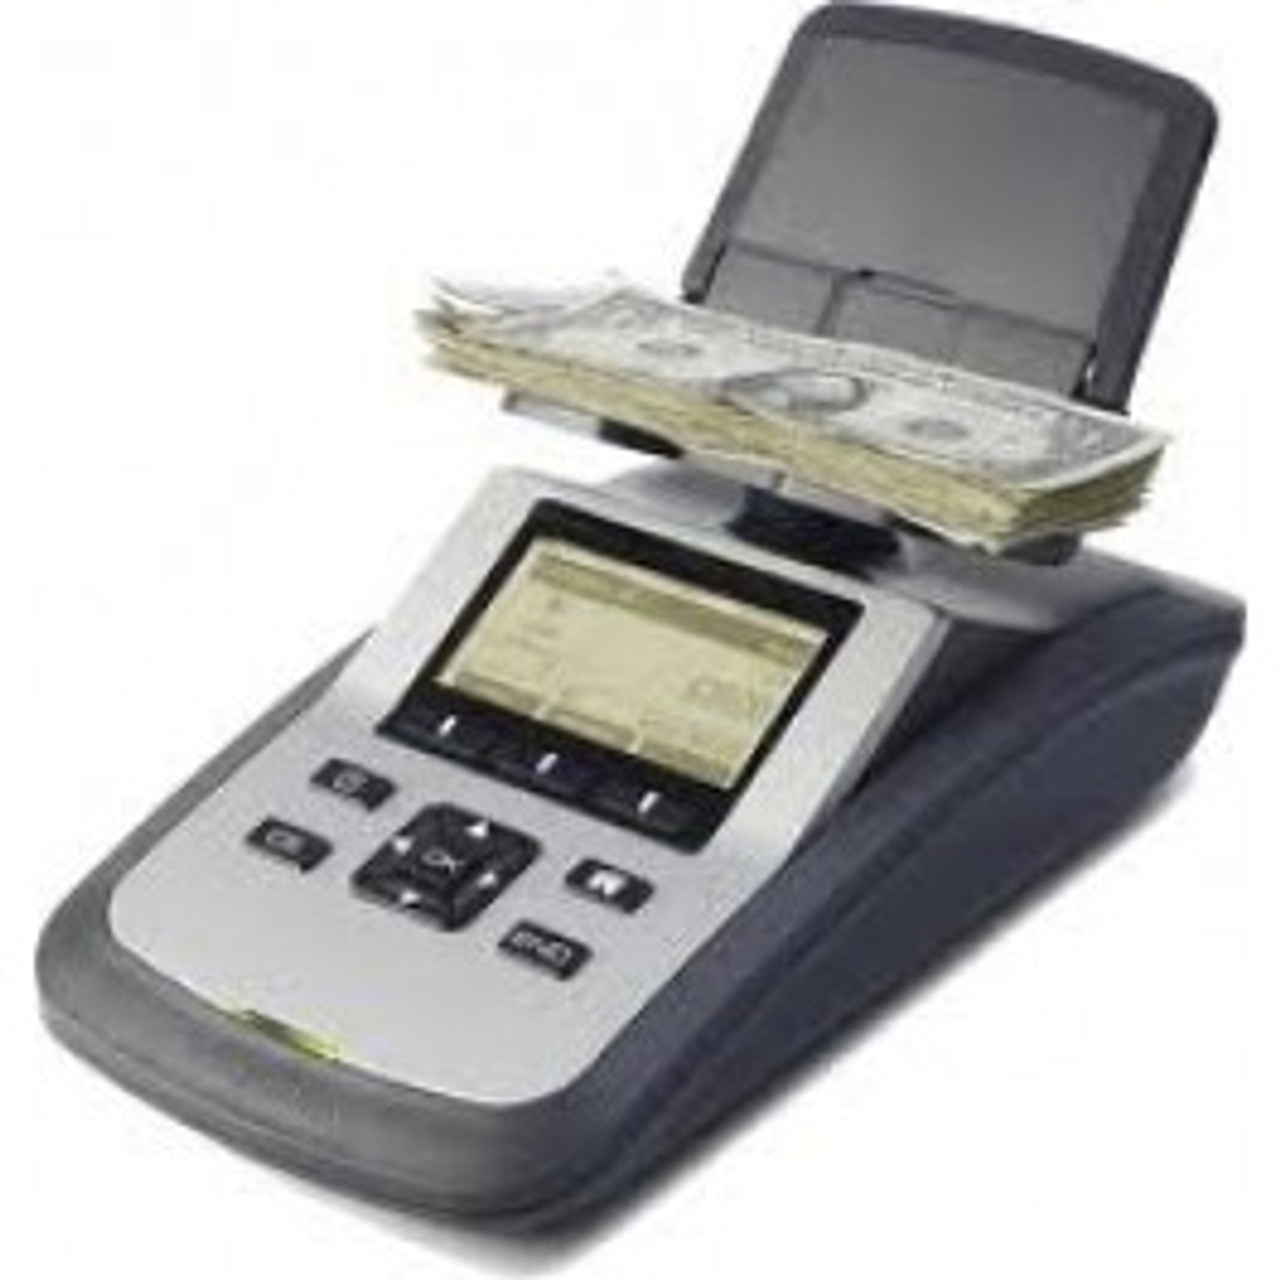 Tellermate T-ix R1000 Currency & Coin Counter Scale, T-iX R1000 Includes  Power Supply